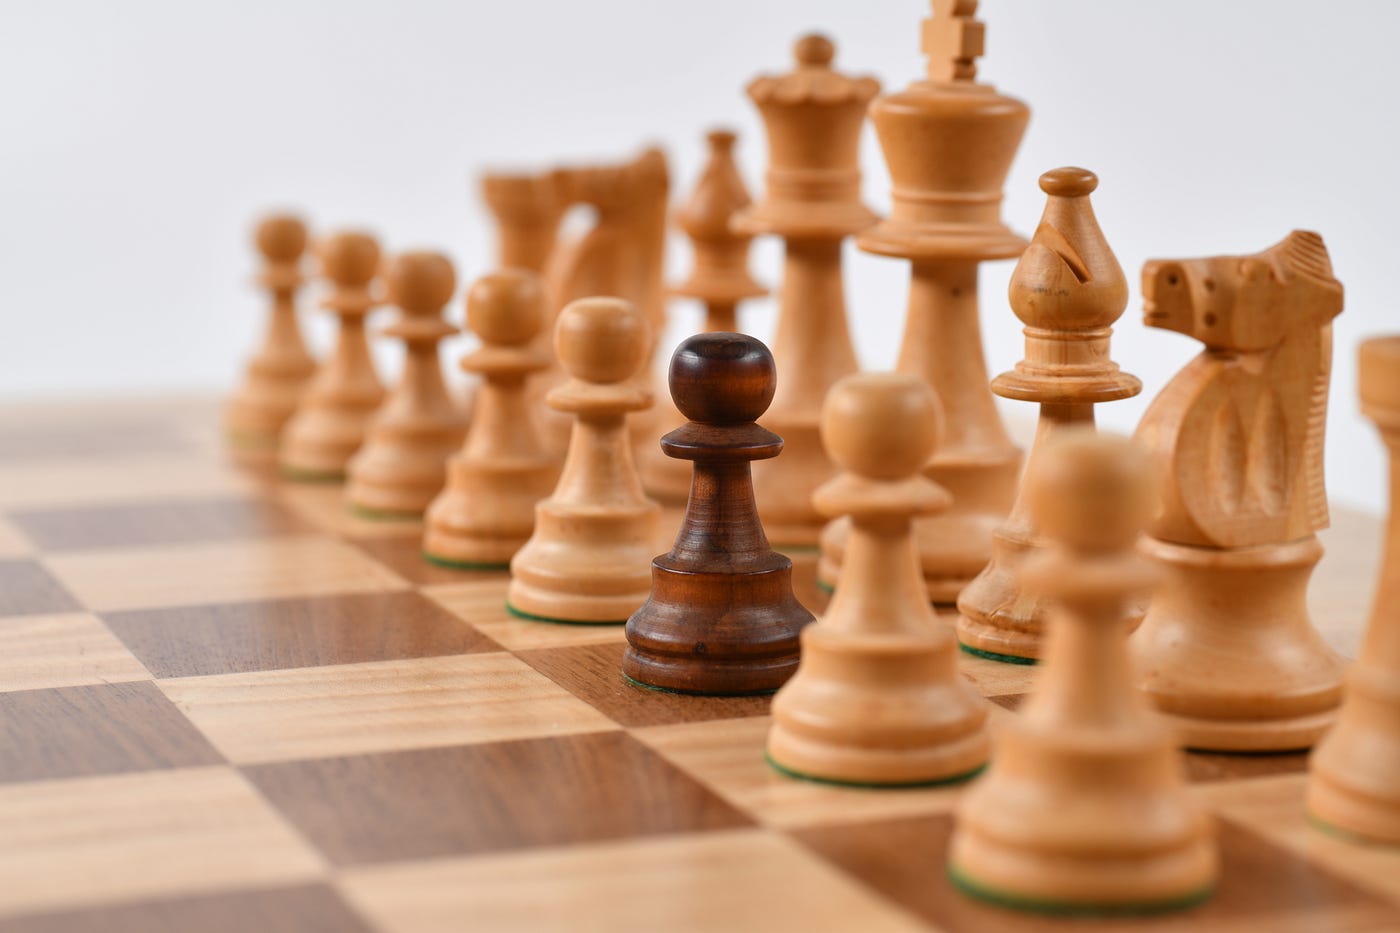 Why Is Chess So Popular Right Now? by Ryan Fan Frame of Reference Medium pic